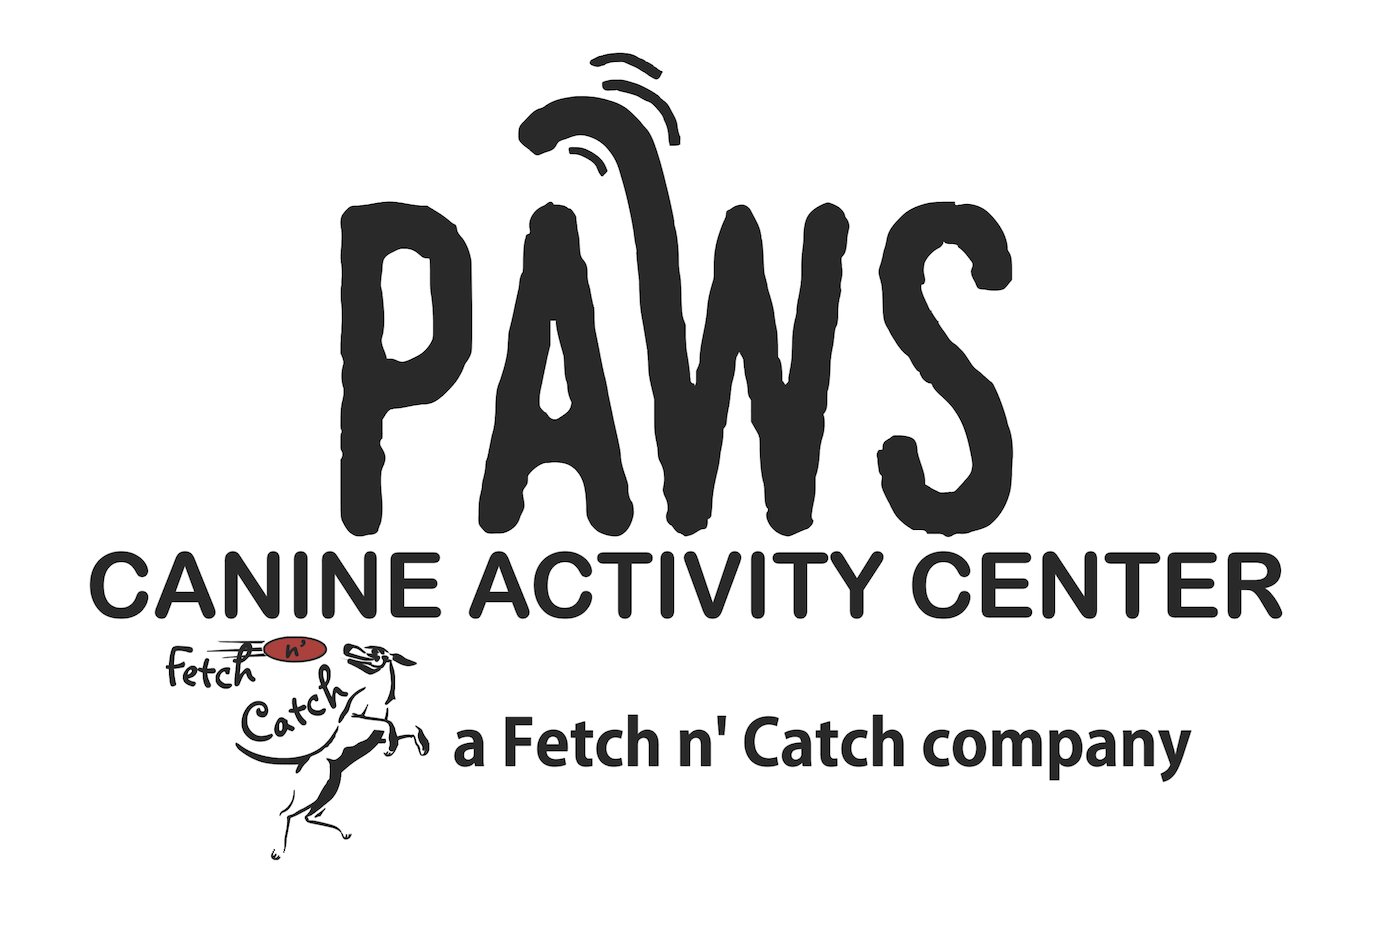 Paws Canine Activity Center